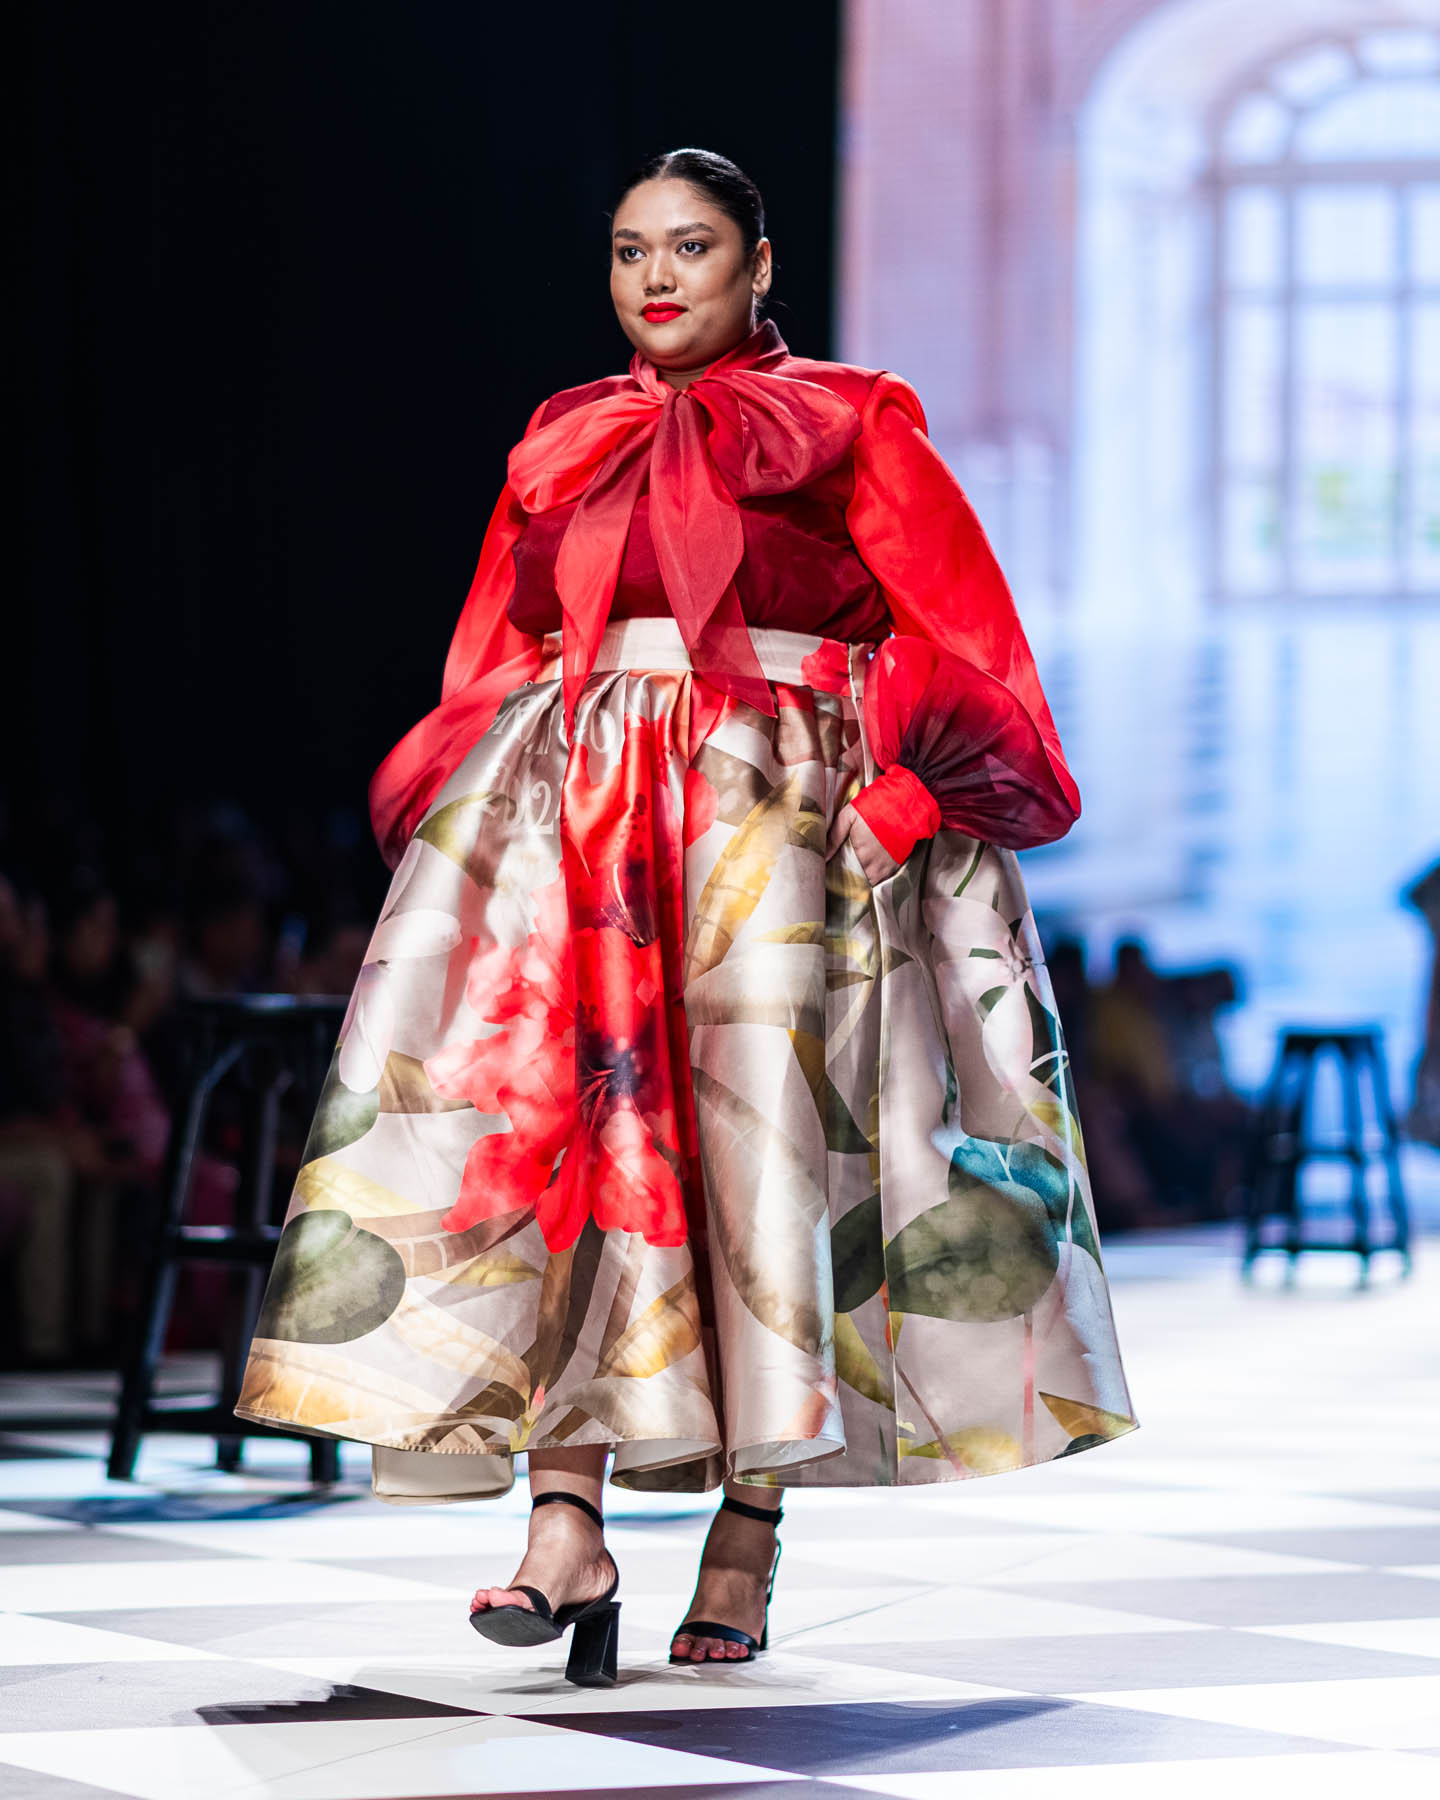 Stealing the Runway Styles of Lakmé Fashion Week with Caprese's